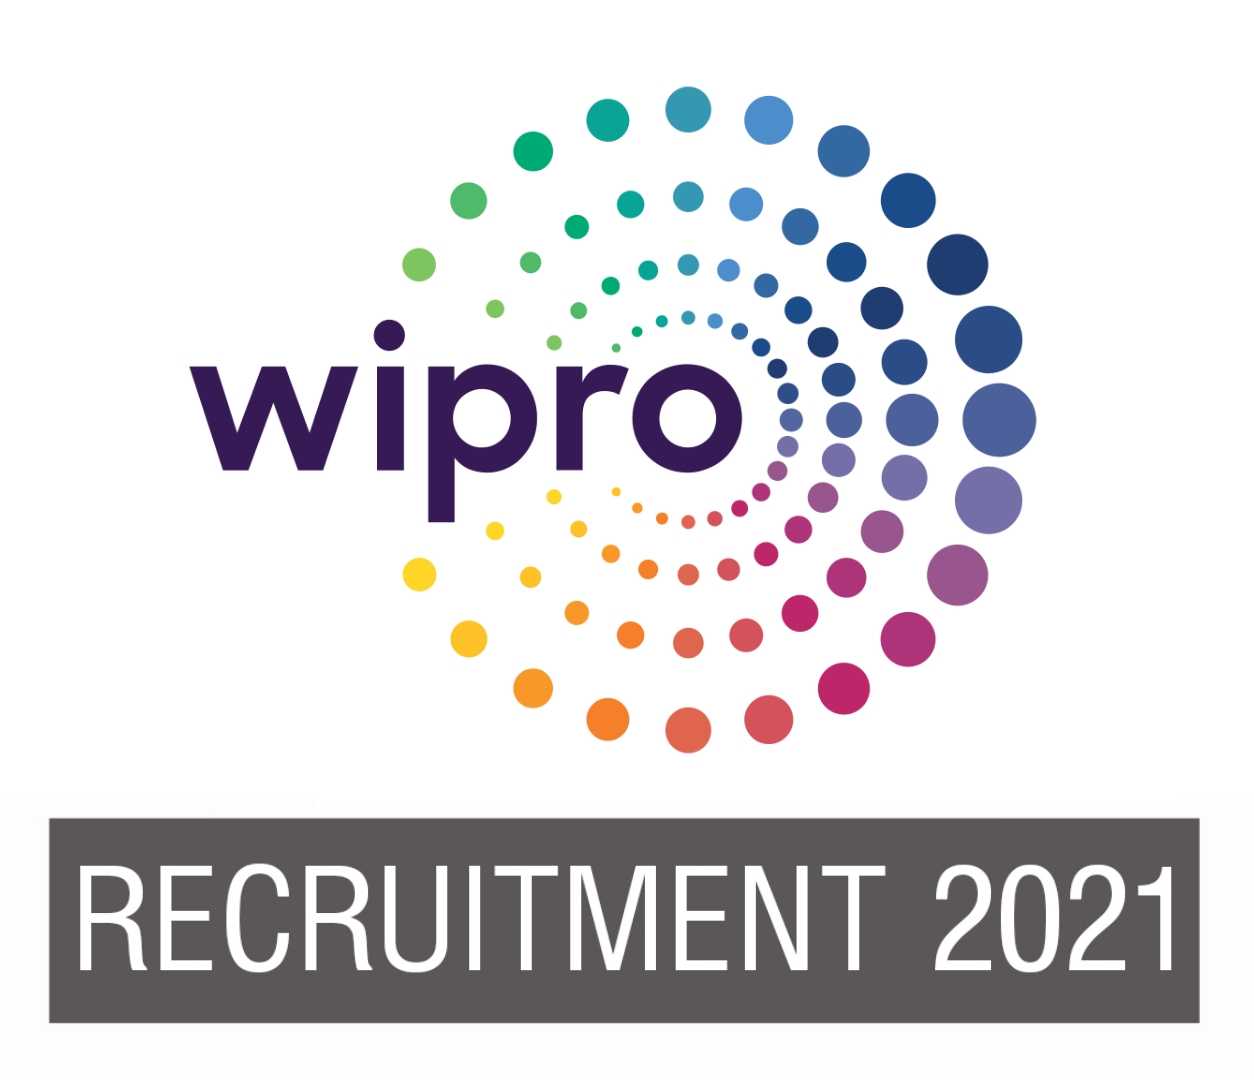 Recruitment in Wipro, this work will have to be done